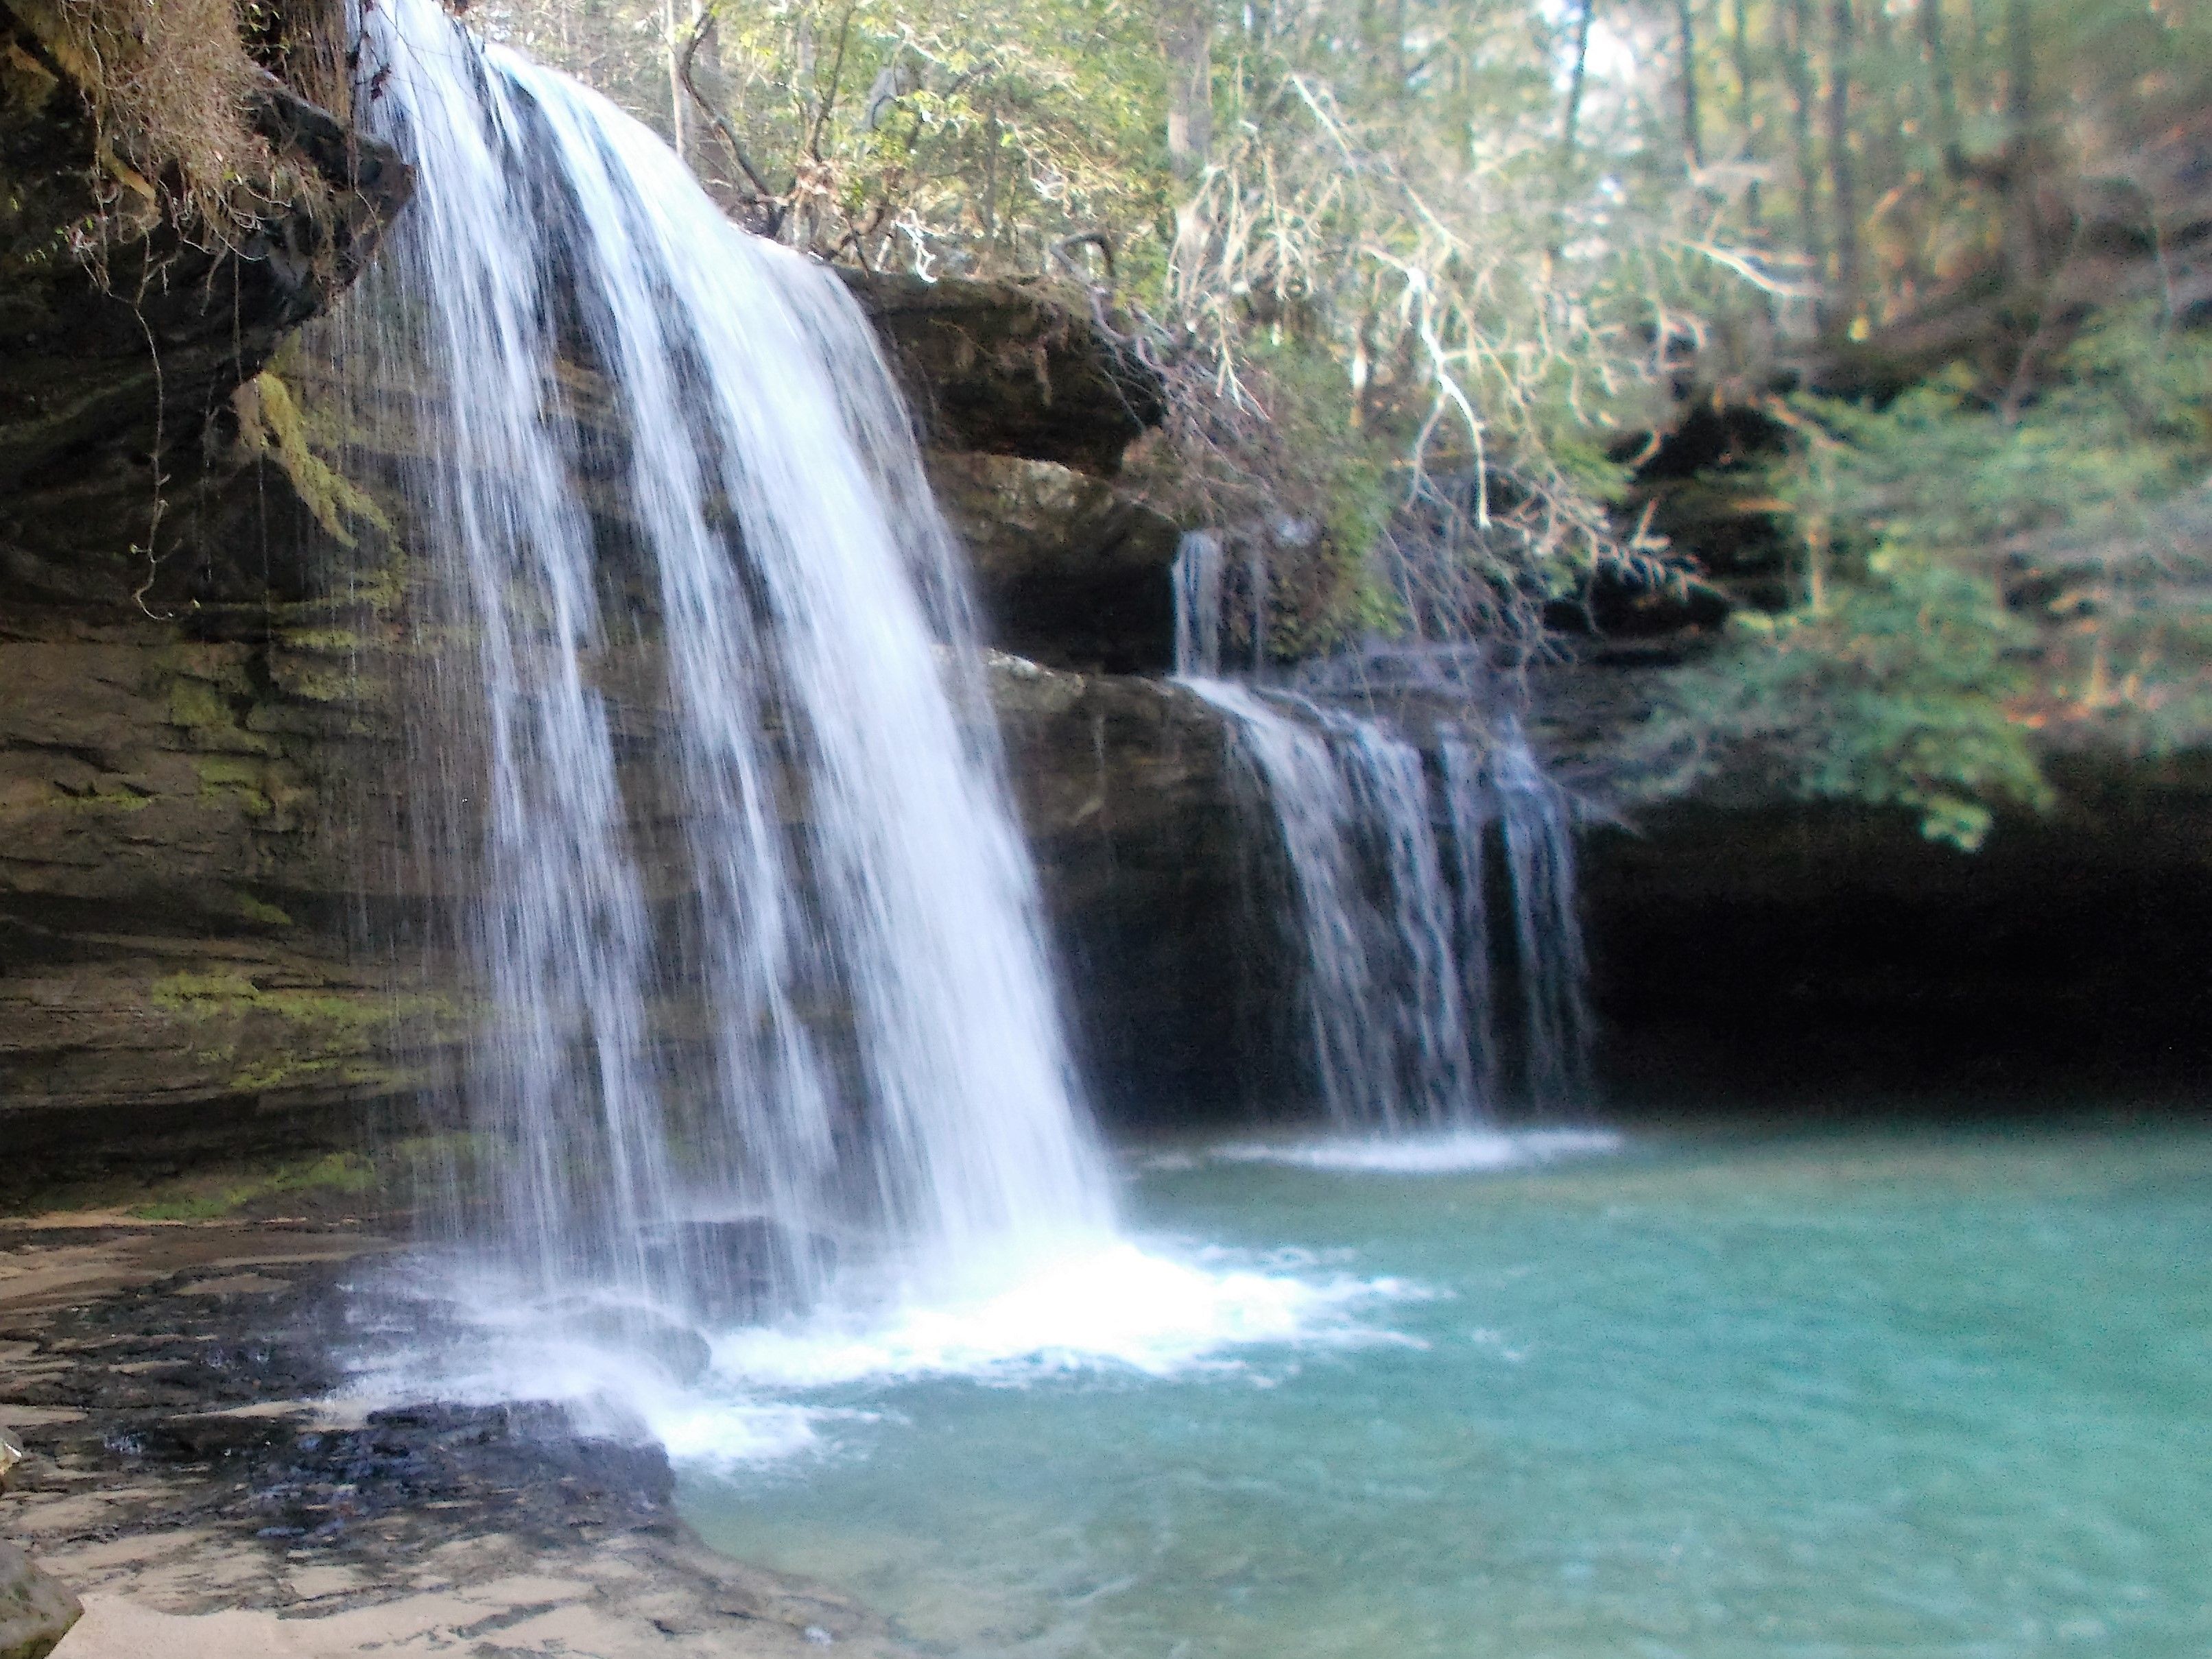 The Caney Creek Falls in The Sipsey Wilderness